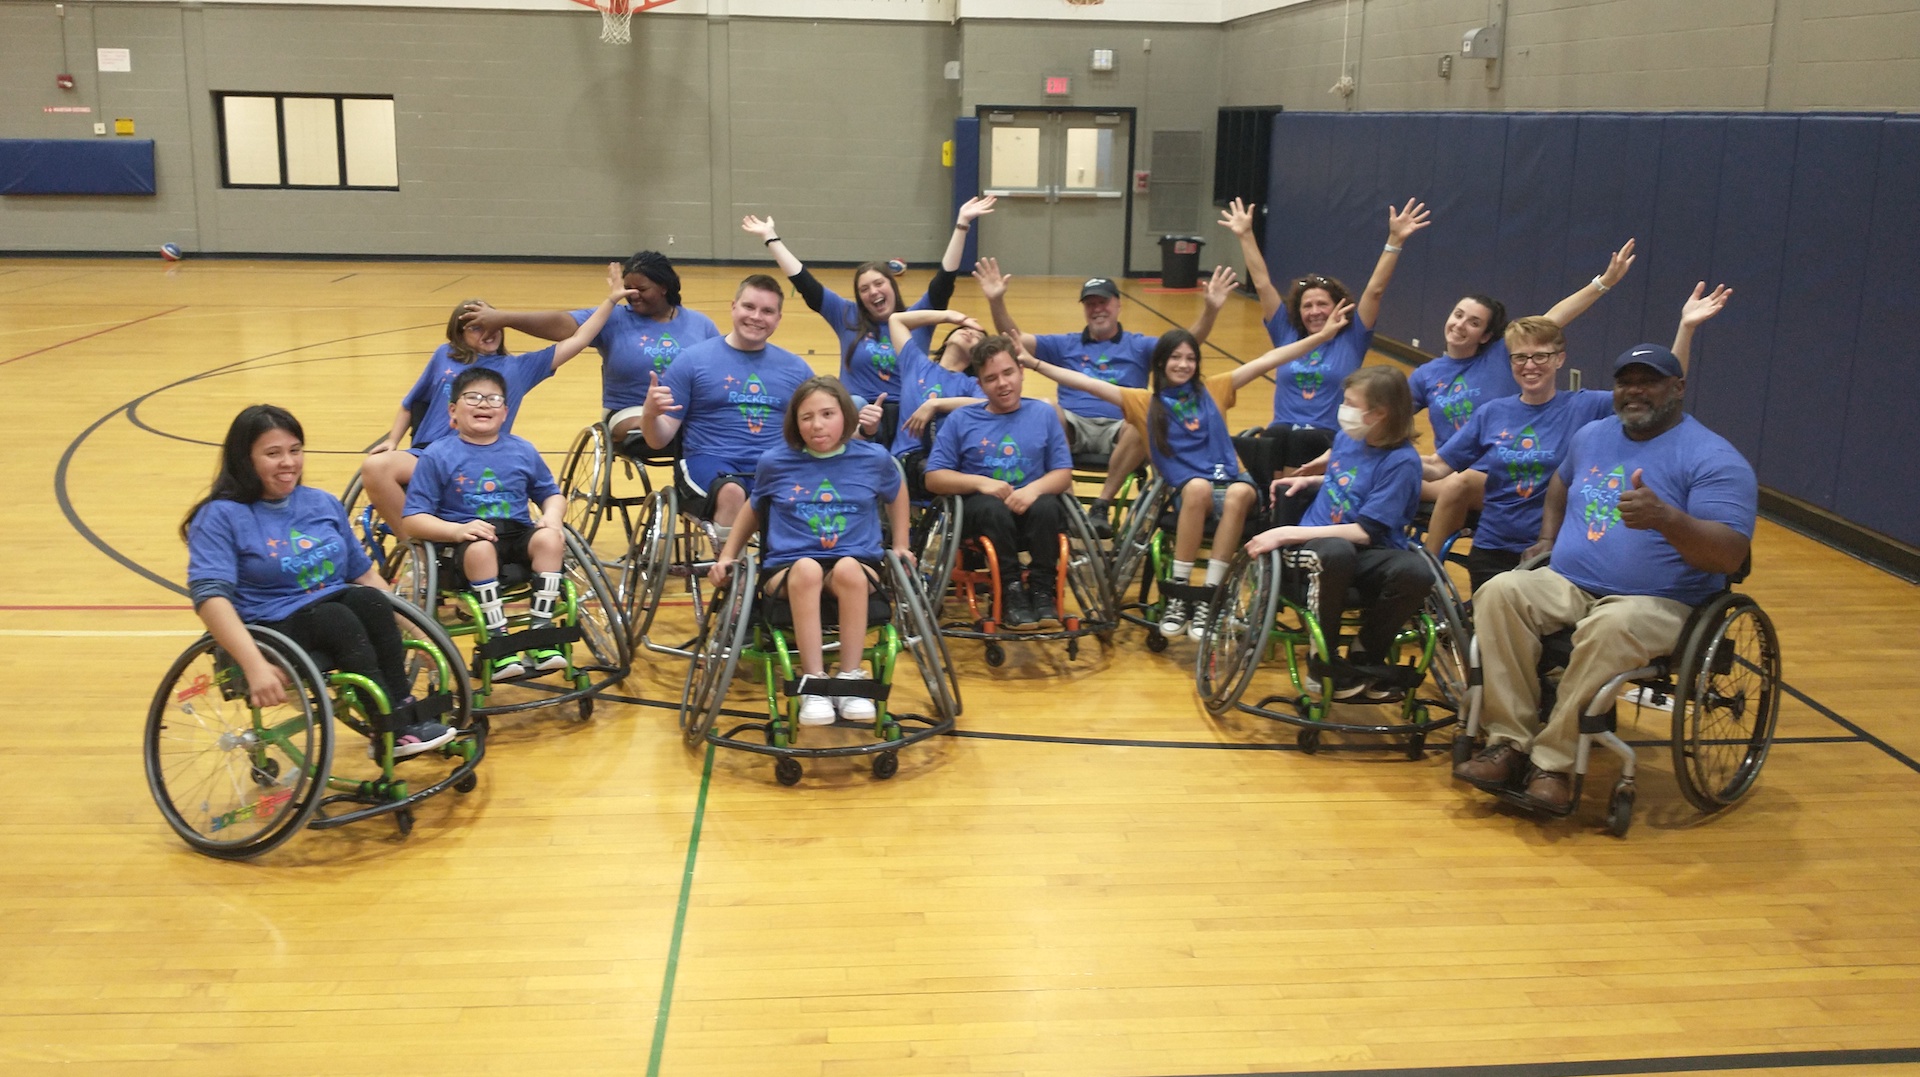 A group of youth and adults in a basketball gym, all in sports wheelchairs and blue tshirts with a rocket graphic on them; all in various poses for a "funny photo shot.